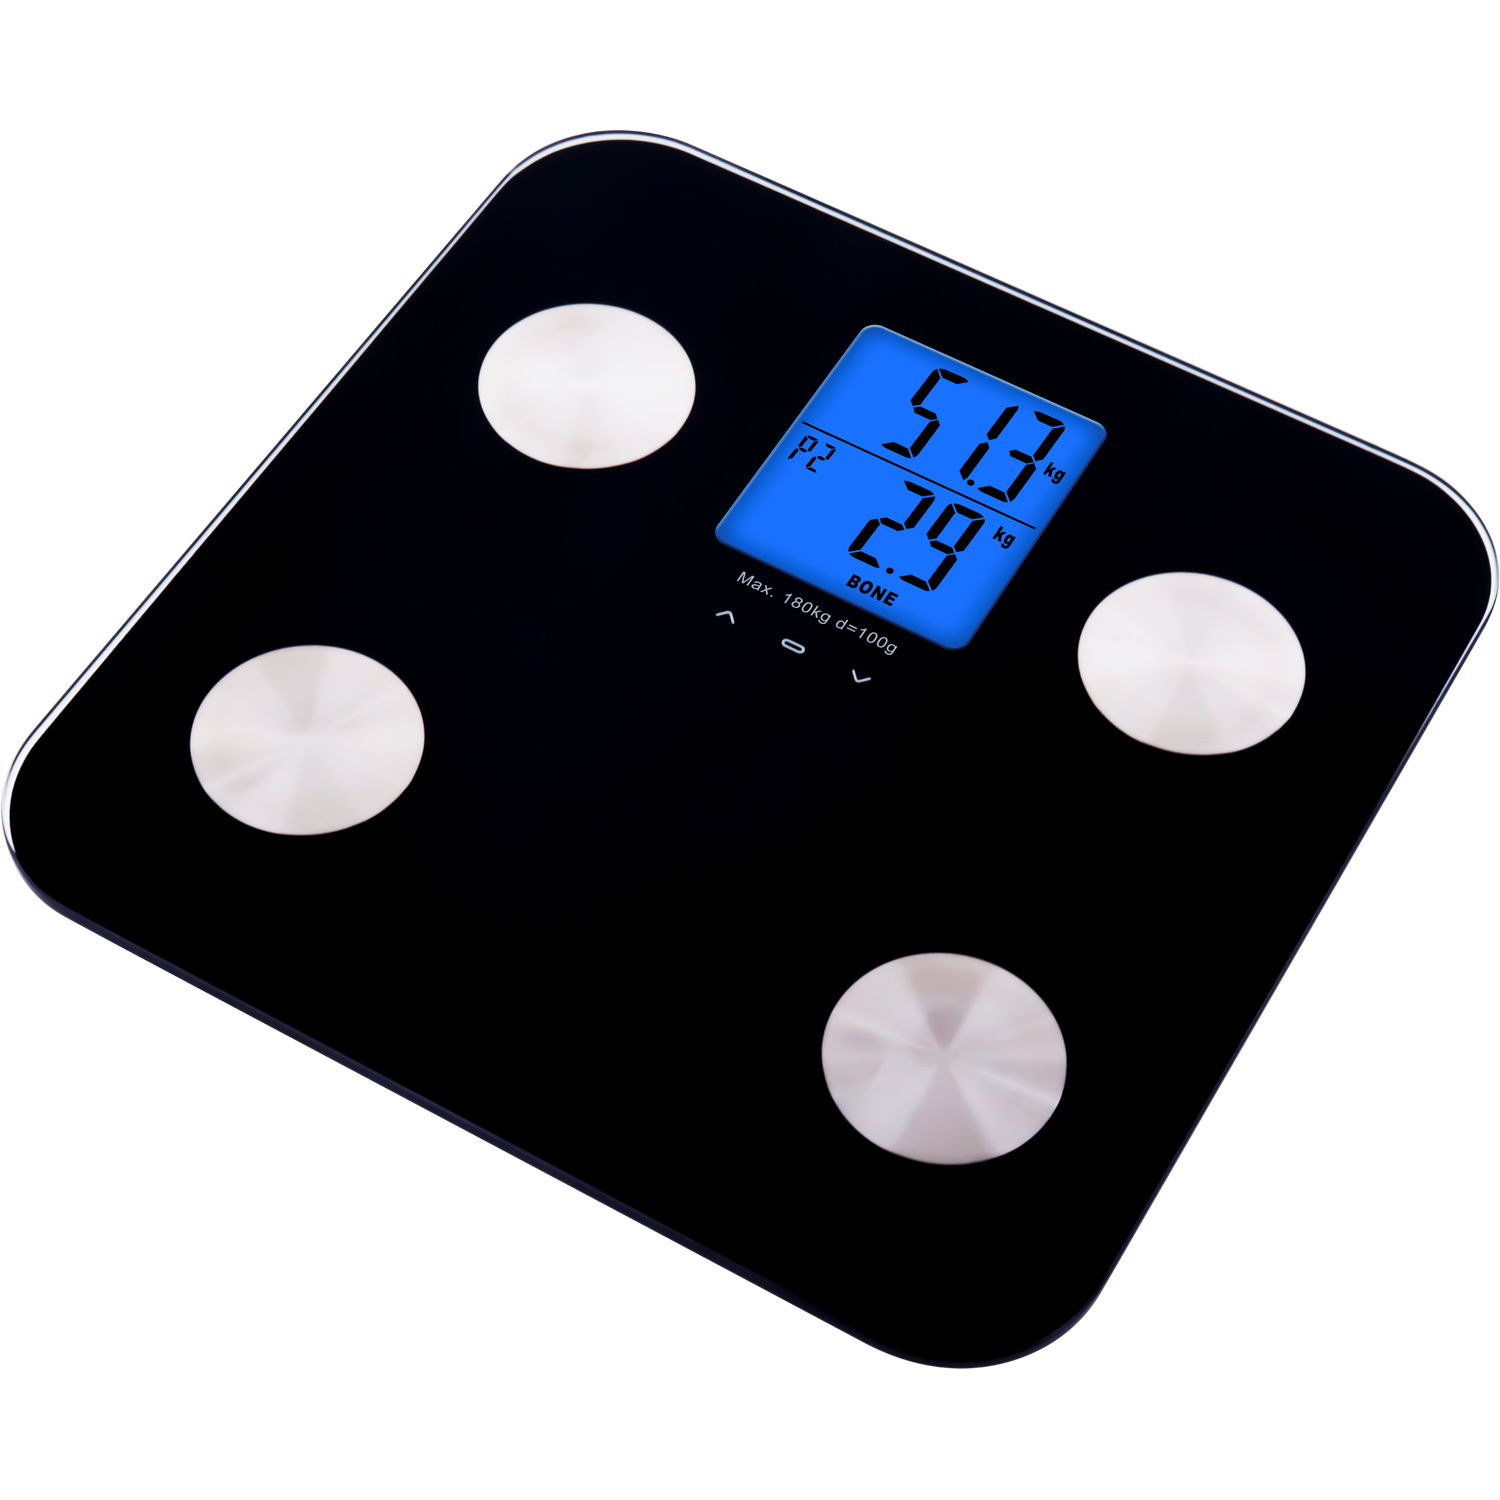 Electronic Body Fat Scale 7 in 1 - Black Image 3